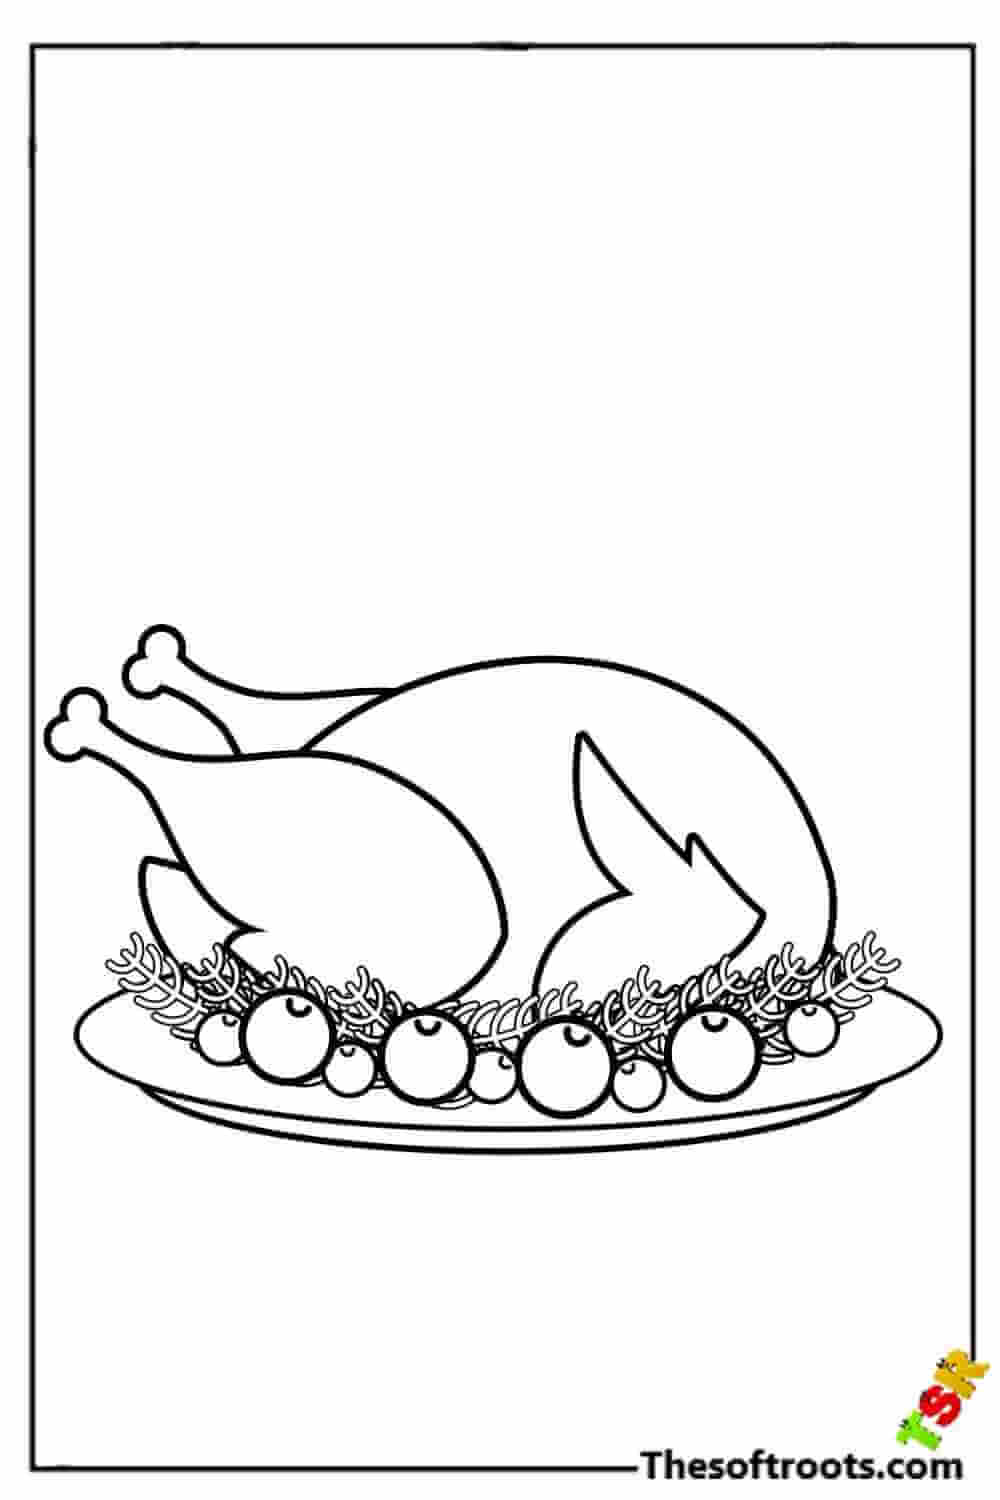 Native American turkey dinner coloring pages